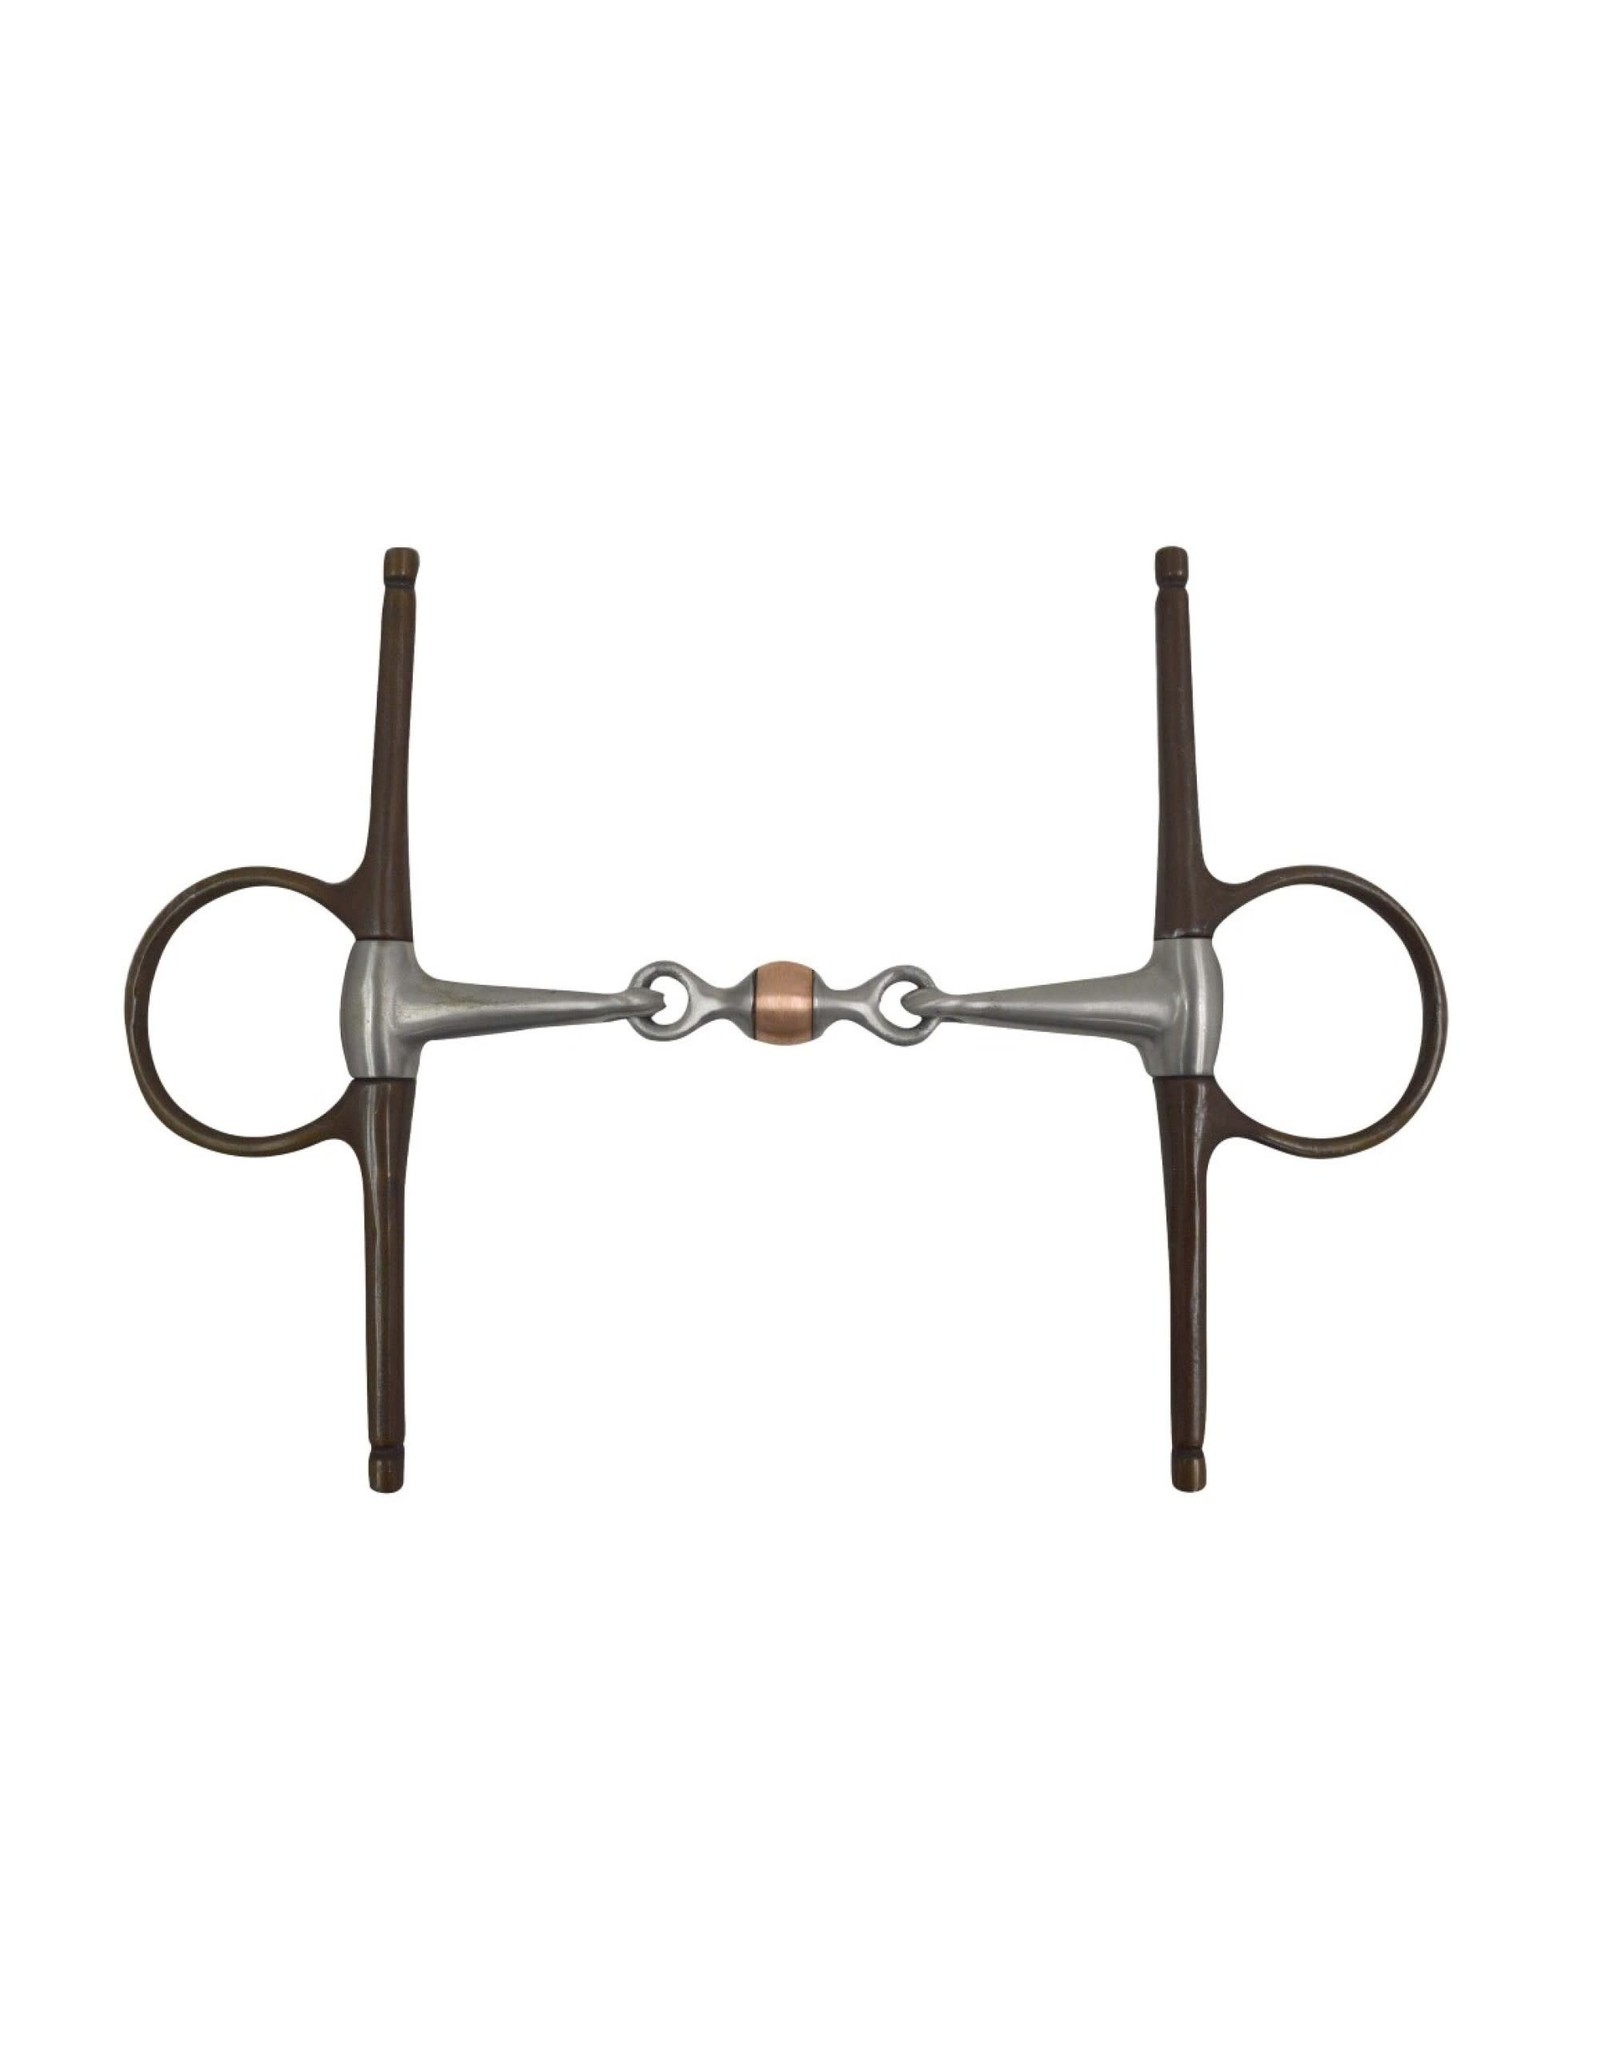 BIT* Metalab FG youngster full cheek 3 piece snaffle 255443